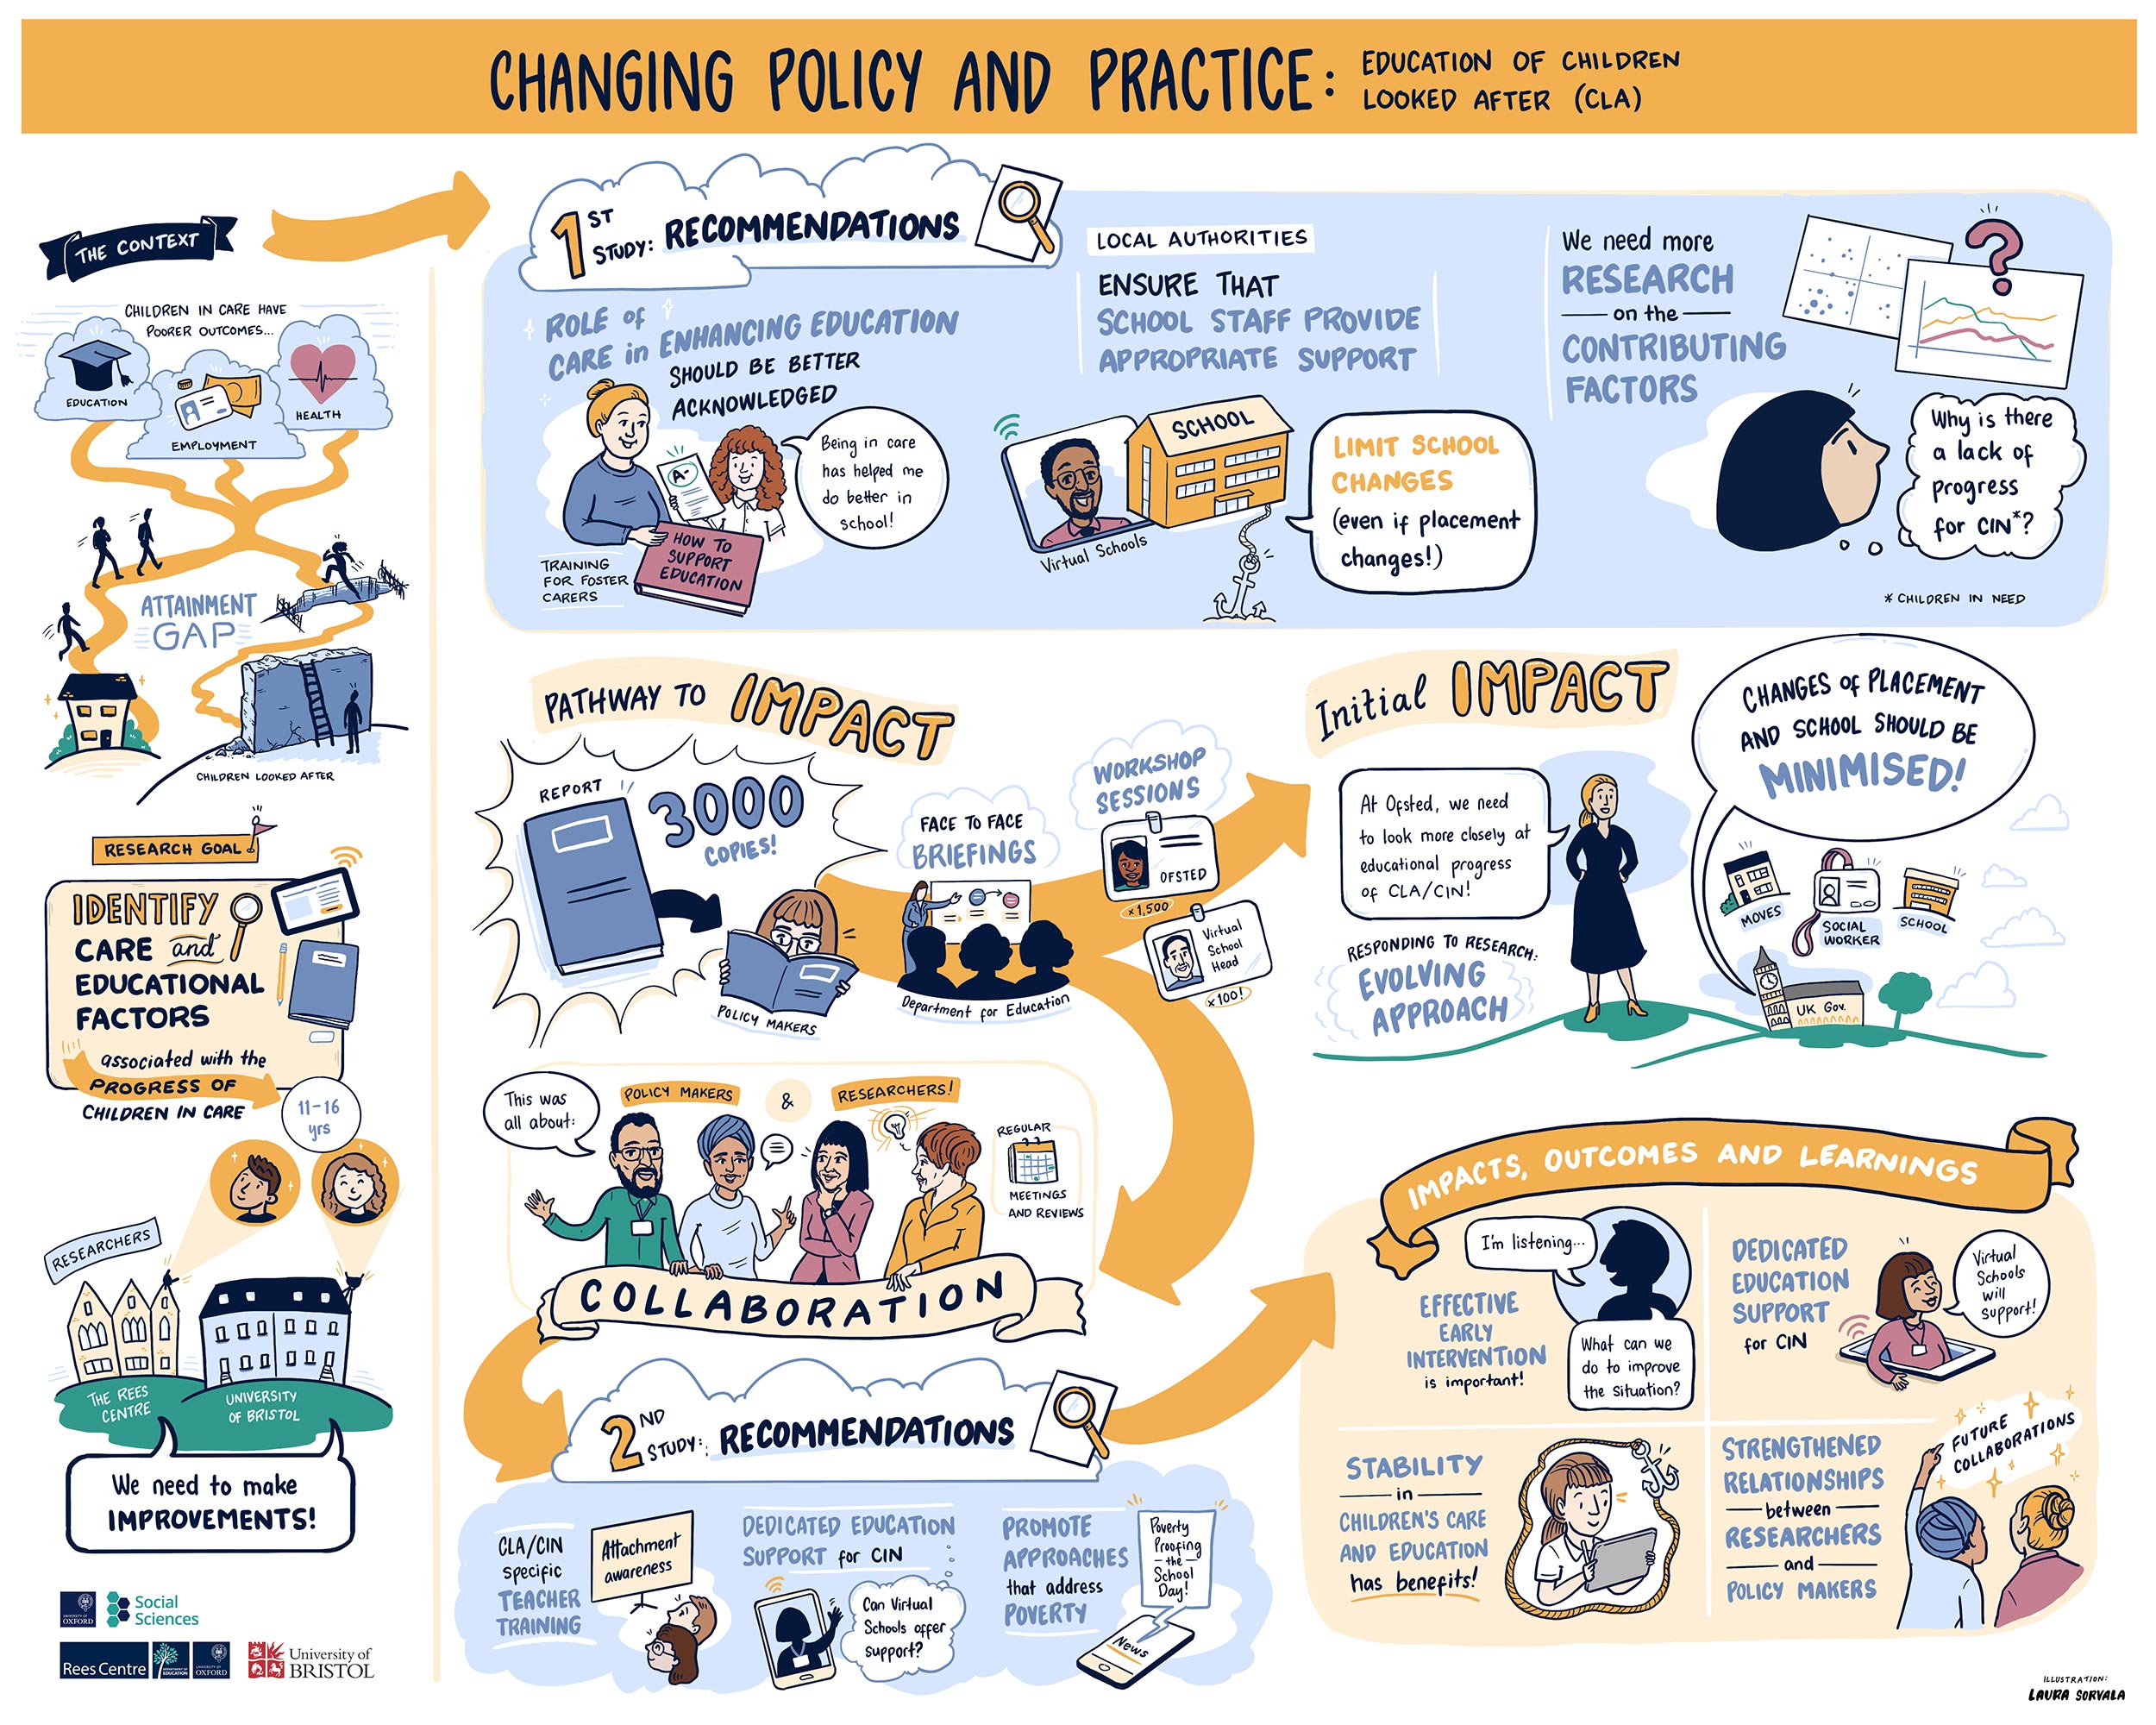 REF Case Study CLA Changing Policy Illustration